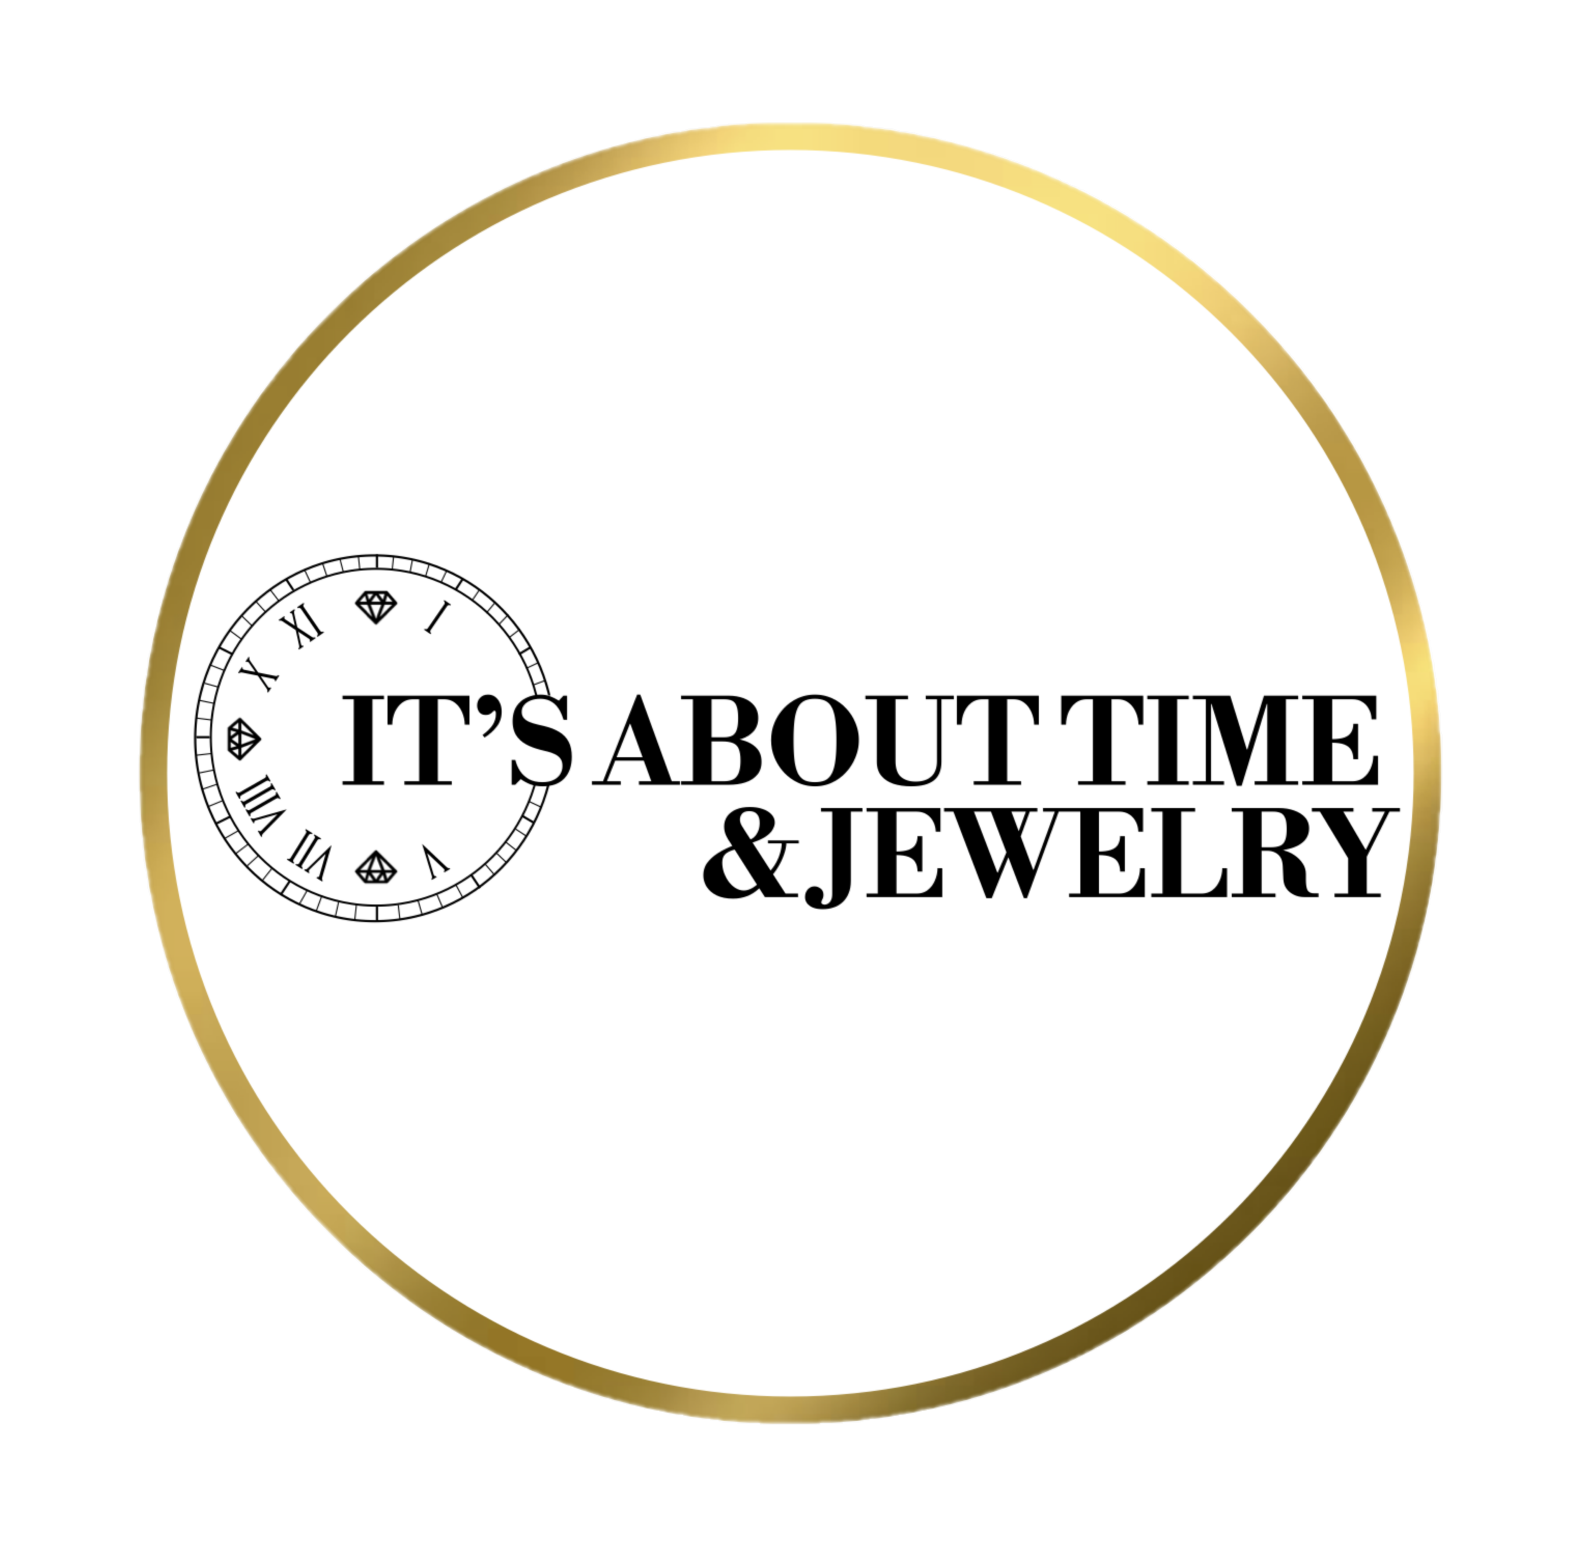 Clearance Jewelry, Clearance Watches